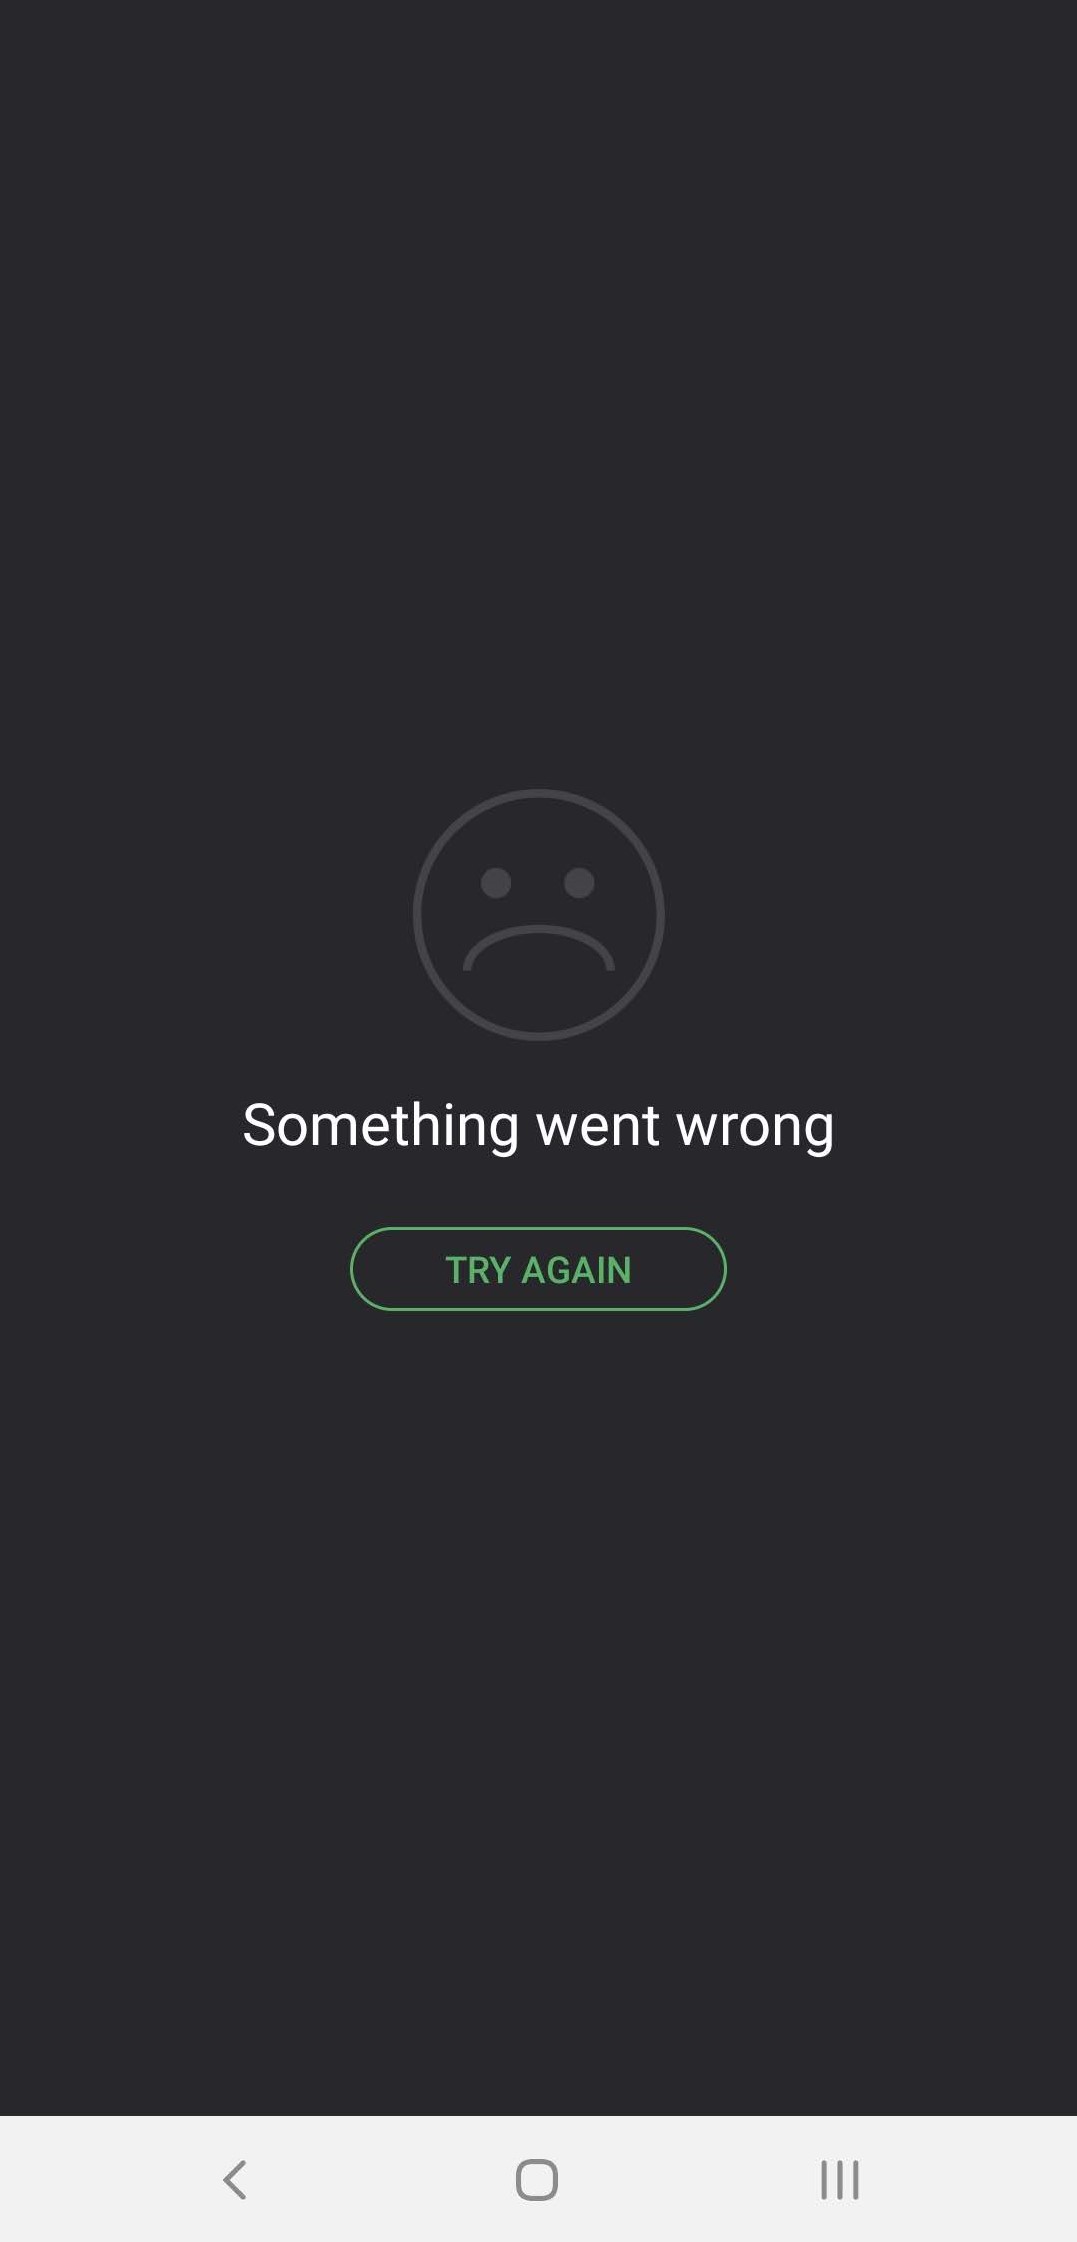 Connection check please grindr internet wrong something your went can i